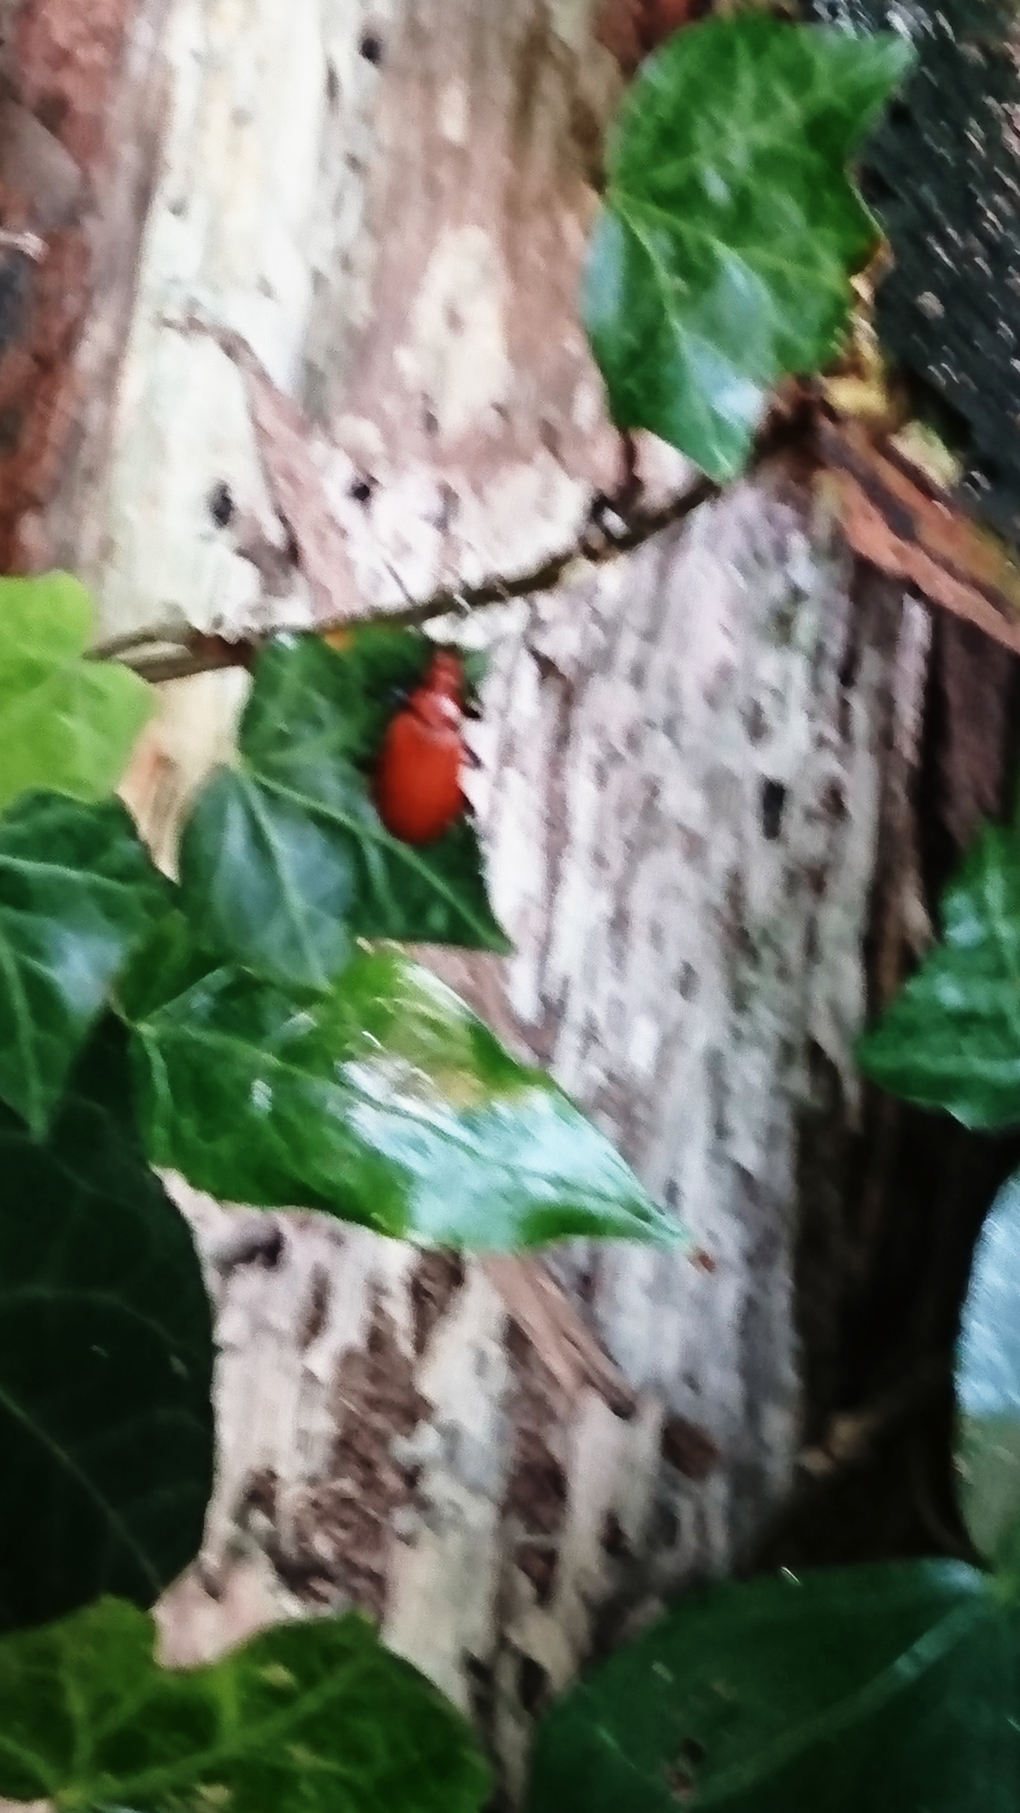 I spied a beautiful bright red beetle on some ivy above our log pile. To my surprise it is called a Common Cardinal Beetle which i had never seen before, so not so common i guess!